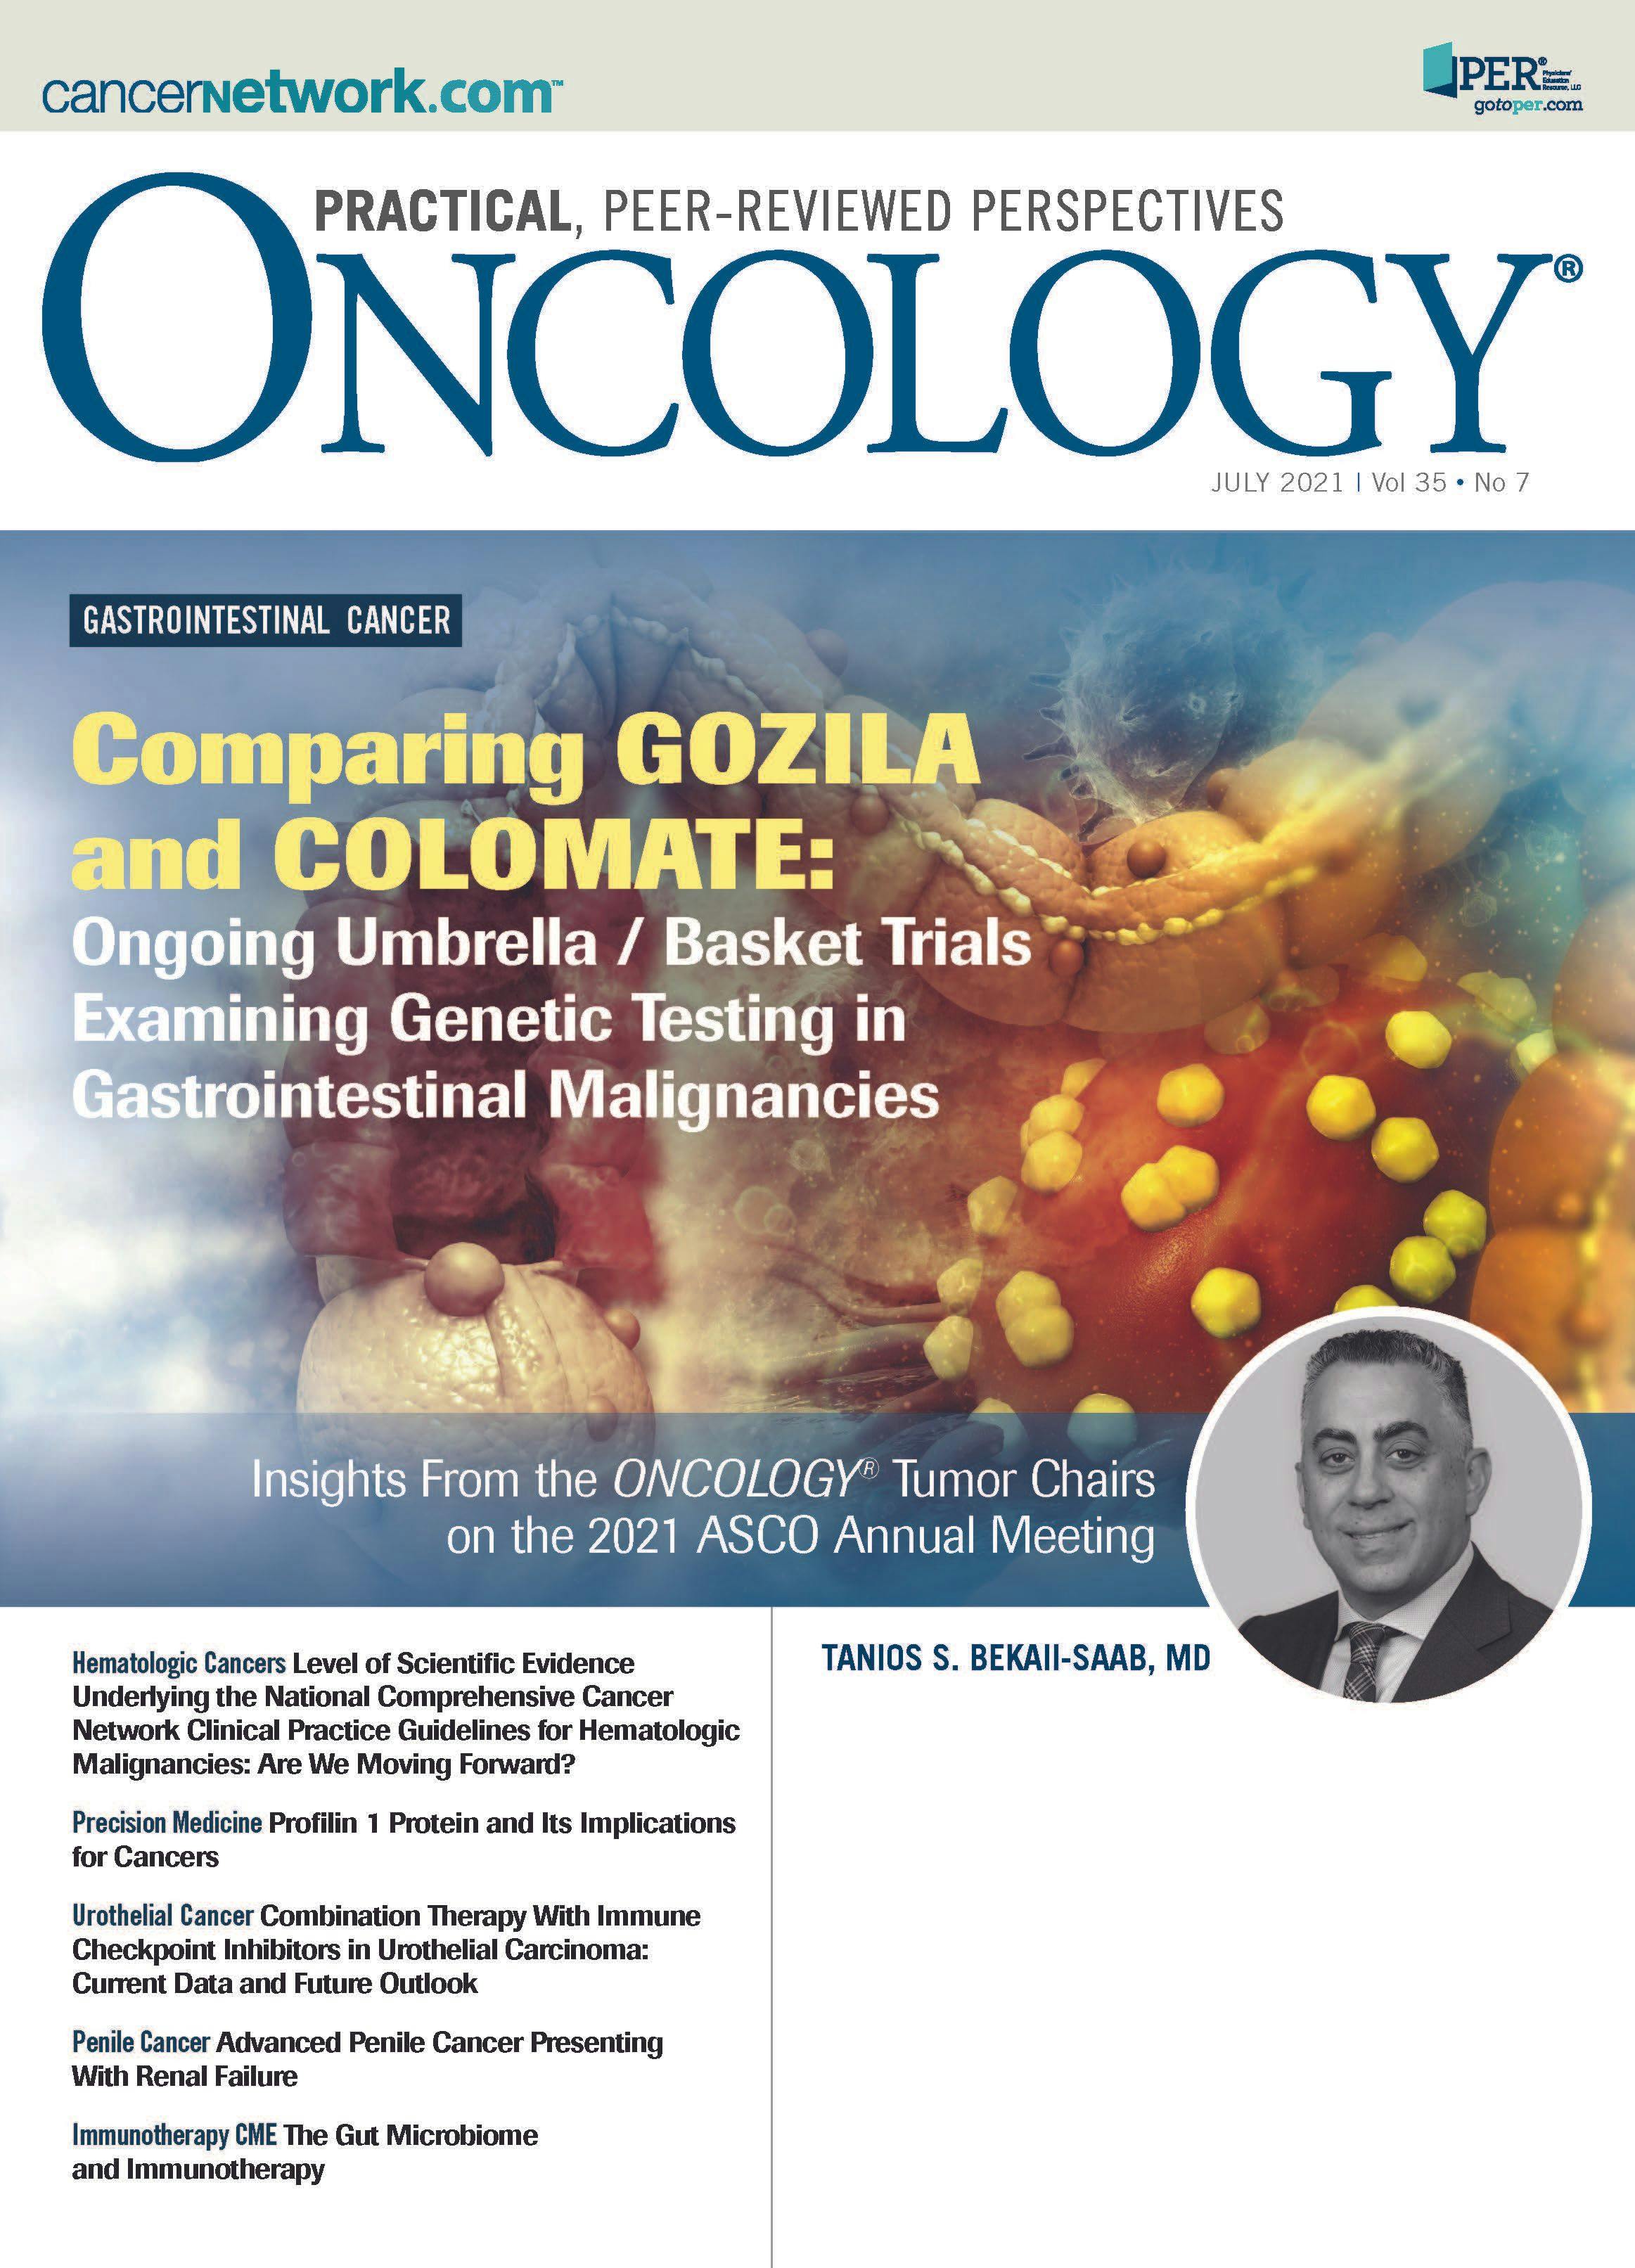 ONCOLOGY Vol 35, Issue 7